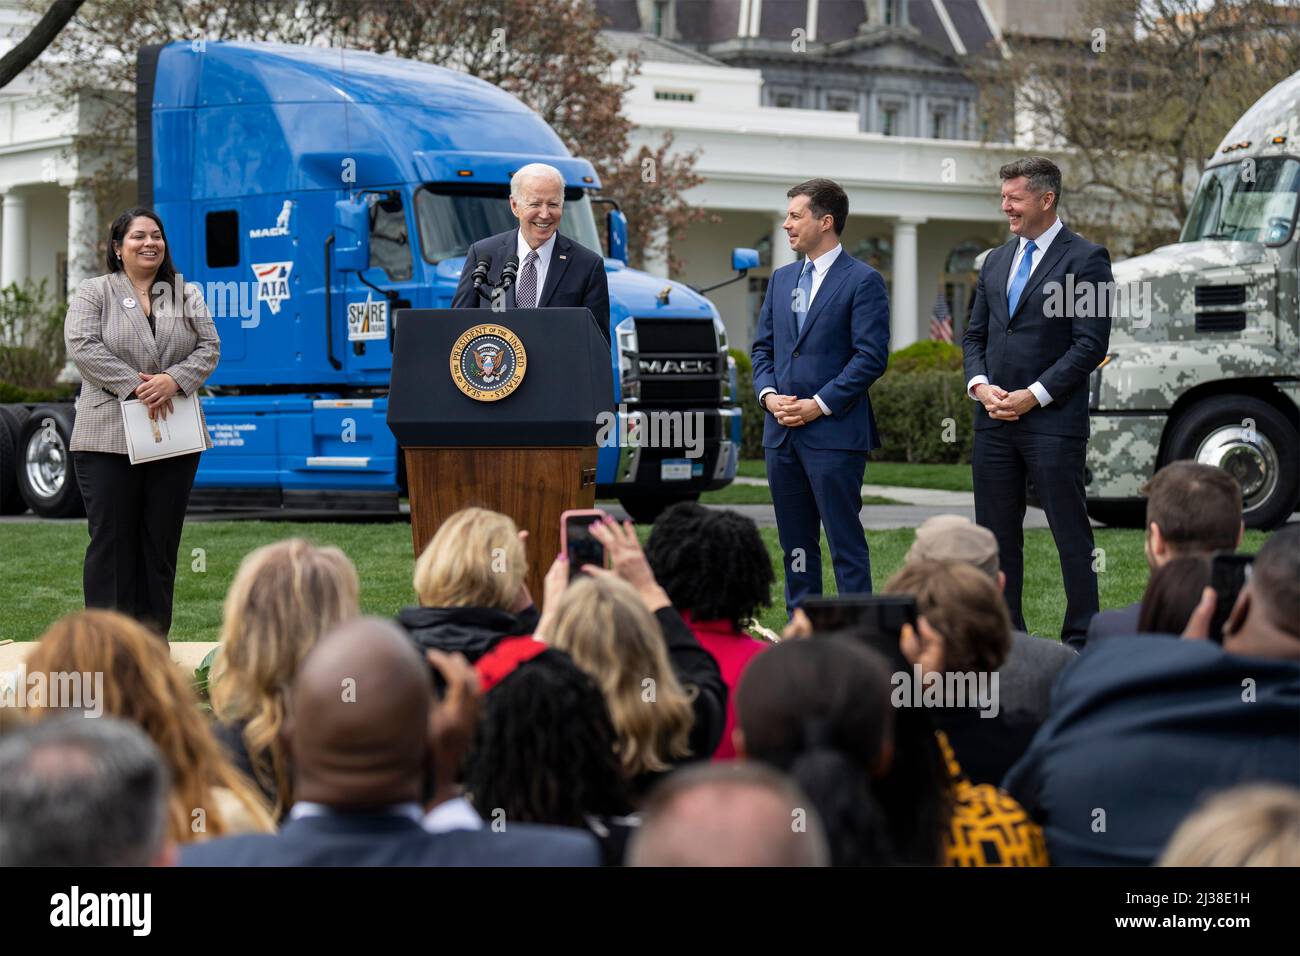 Washington, United States of America. 04 April, 2022. U.S President Joe Biden delivers remarks during an event highlighting federal investments in the trucking industry on the South Lawn of the White House, April 4, 2022 in Washington, D.C. Standing from left to right are: Trucking apprentice Maria Rodriguez, President Joe Biden, Transportation Secretary Pete Buttigieg, and Veterans Trucking Task Force chairman former Rep. Patrick Murphy.  Credit: Adam Schultz/White House Photo/Alamy Live News Stock Photo